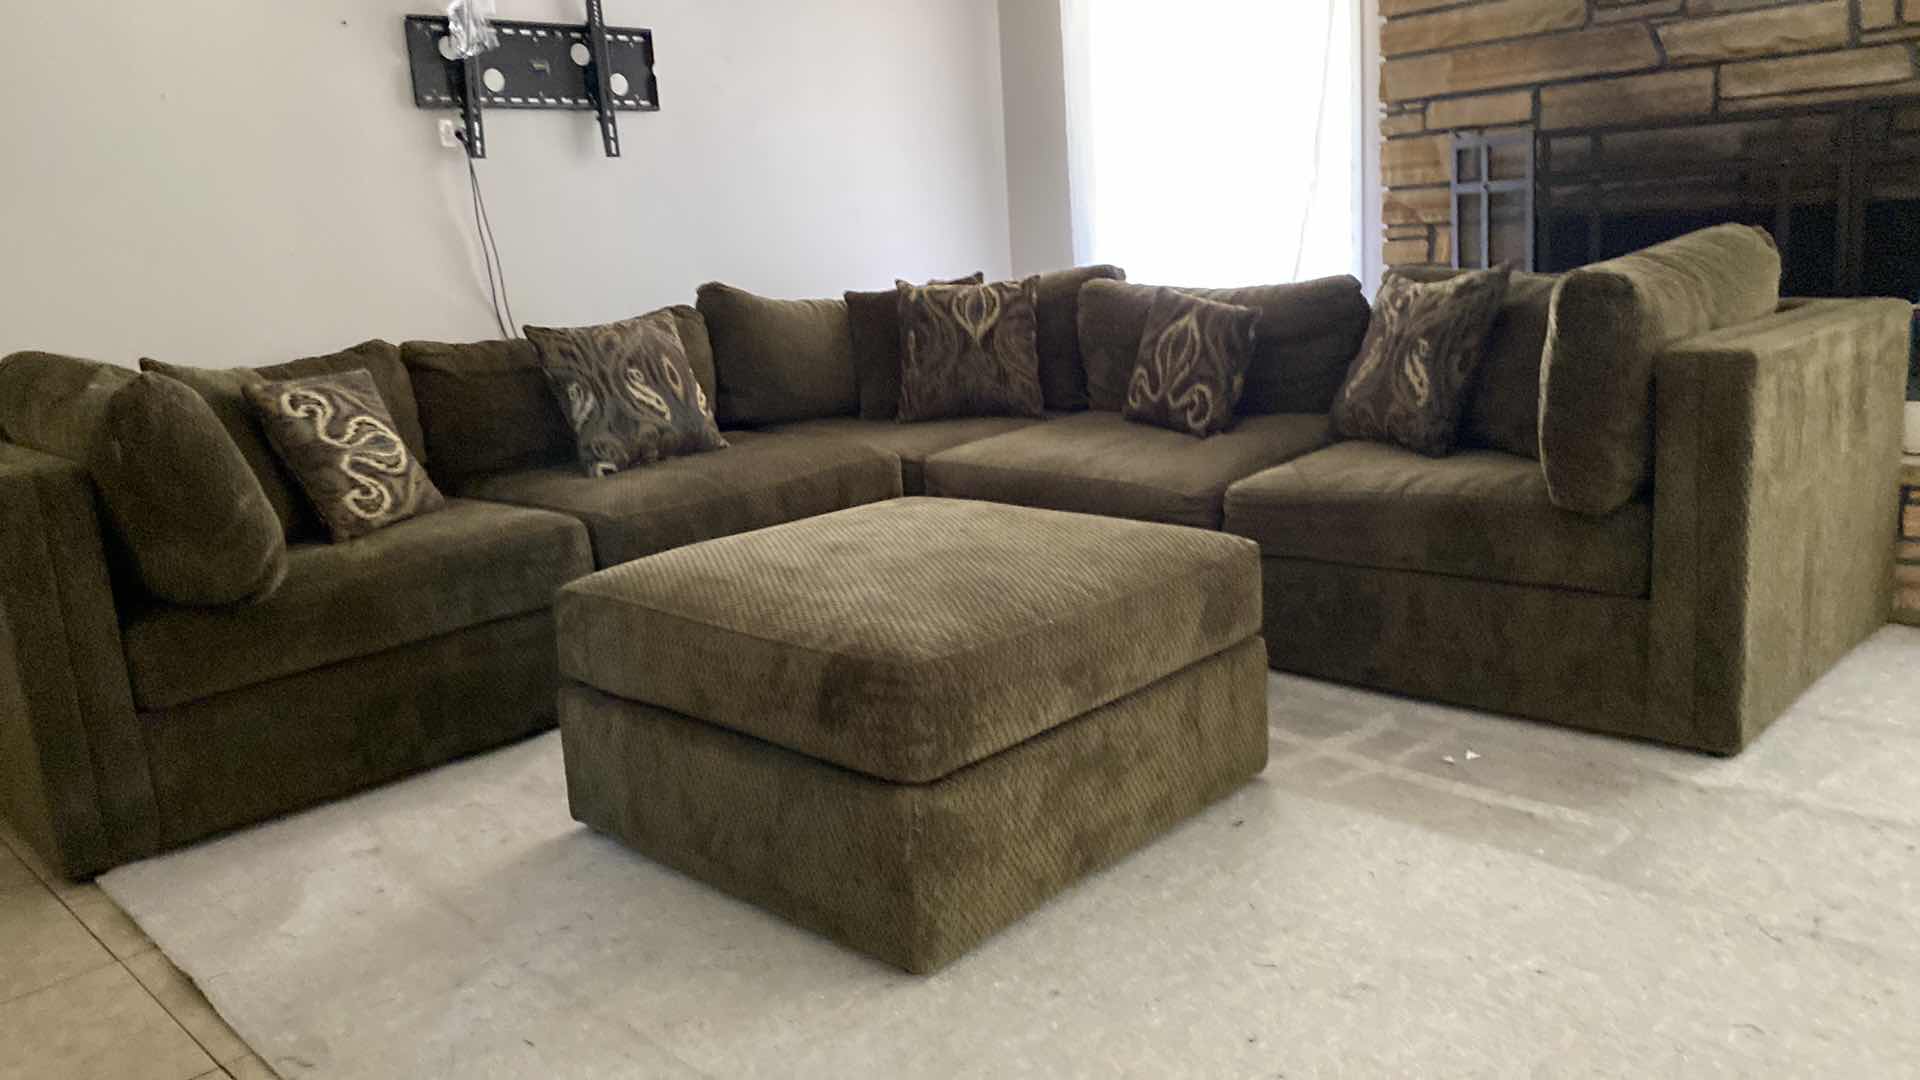 Photo 2 of 10‘ x 10‘ SECTIONAL OLIVE GREEN FABRIC SOFA AND OTTOMAN 3‘ x 3‘